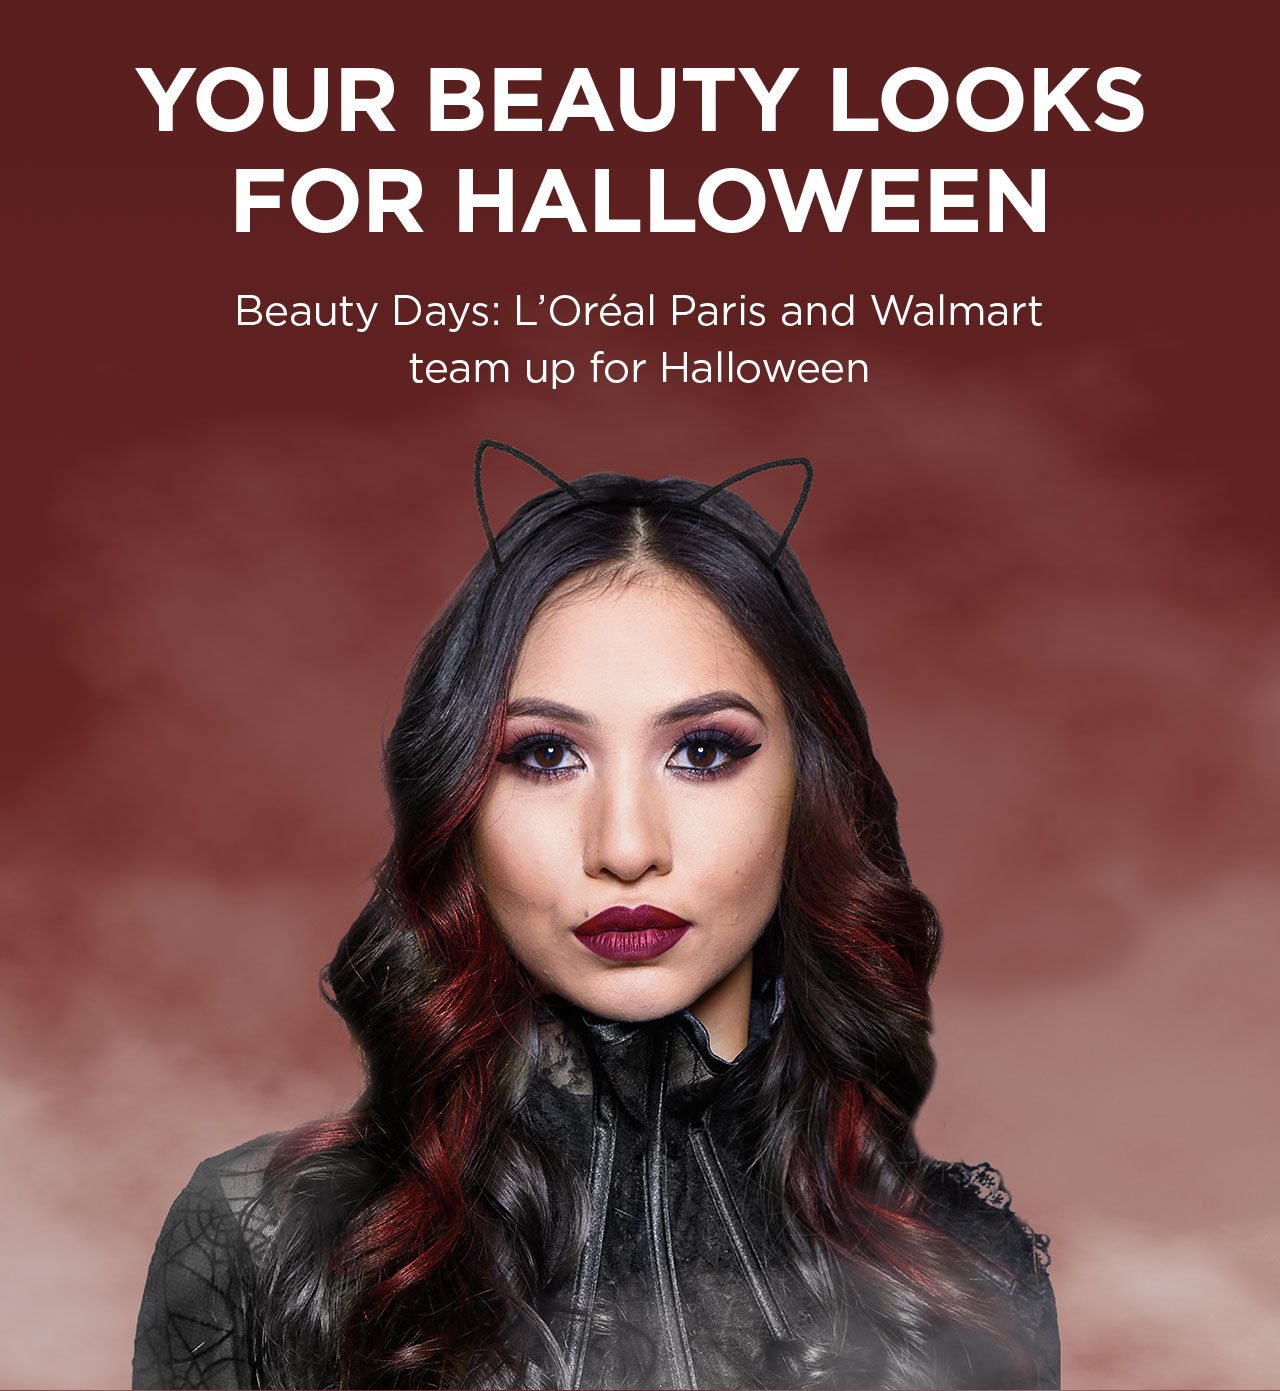 YOUR BEAUTY LOOKS FOR HALLOWEEN - Beauty Days: L'Oréal Paris and Walmart team up for Halloween